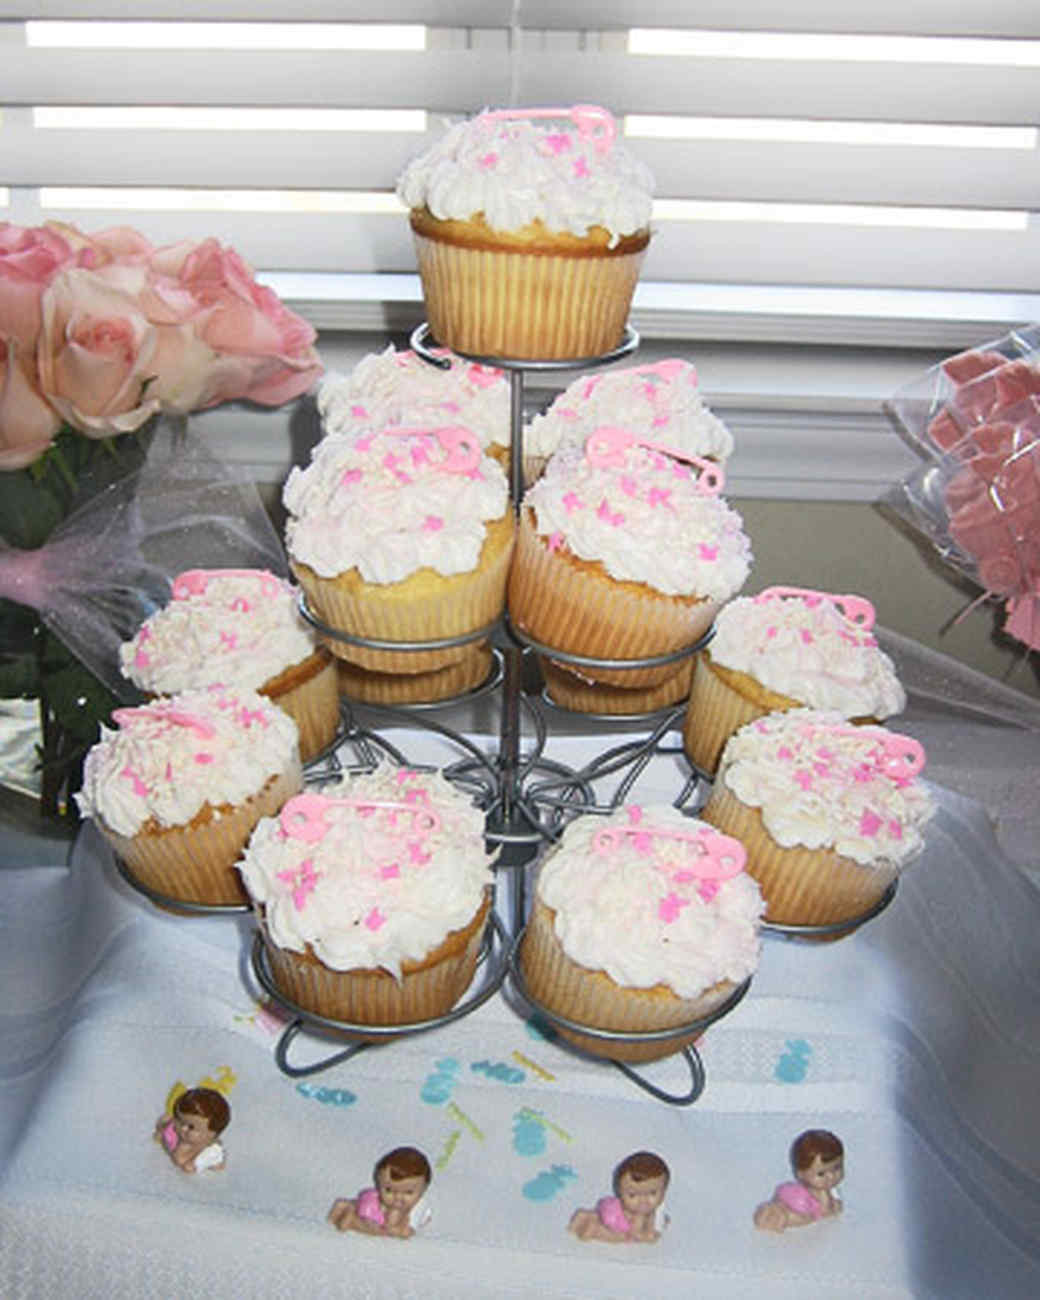 Baby Shower Cakes And Cupcakes
 Your Best Cupcakes for Baby Showers